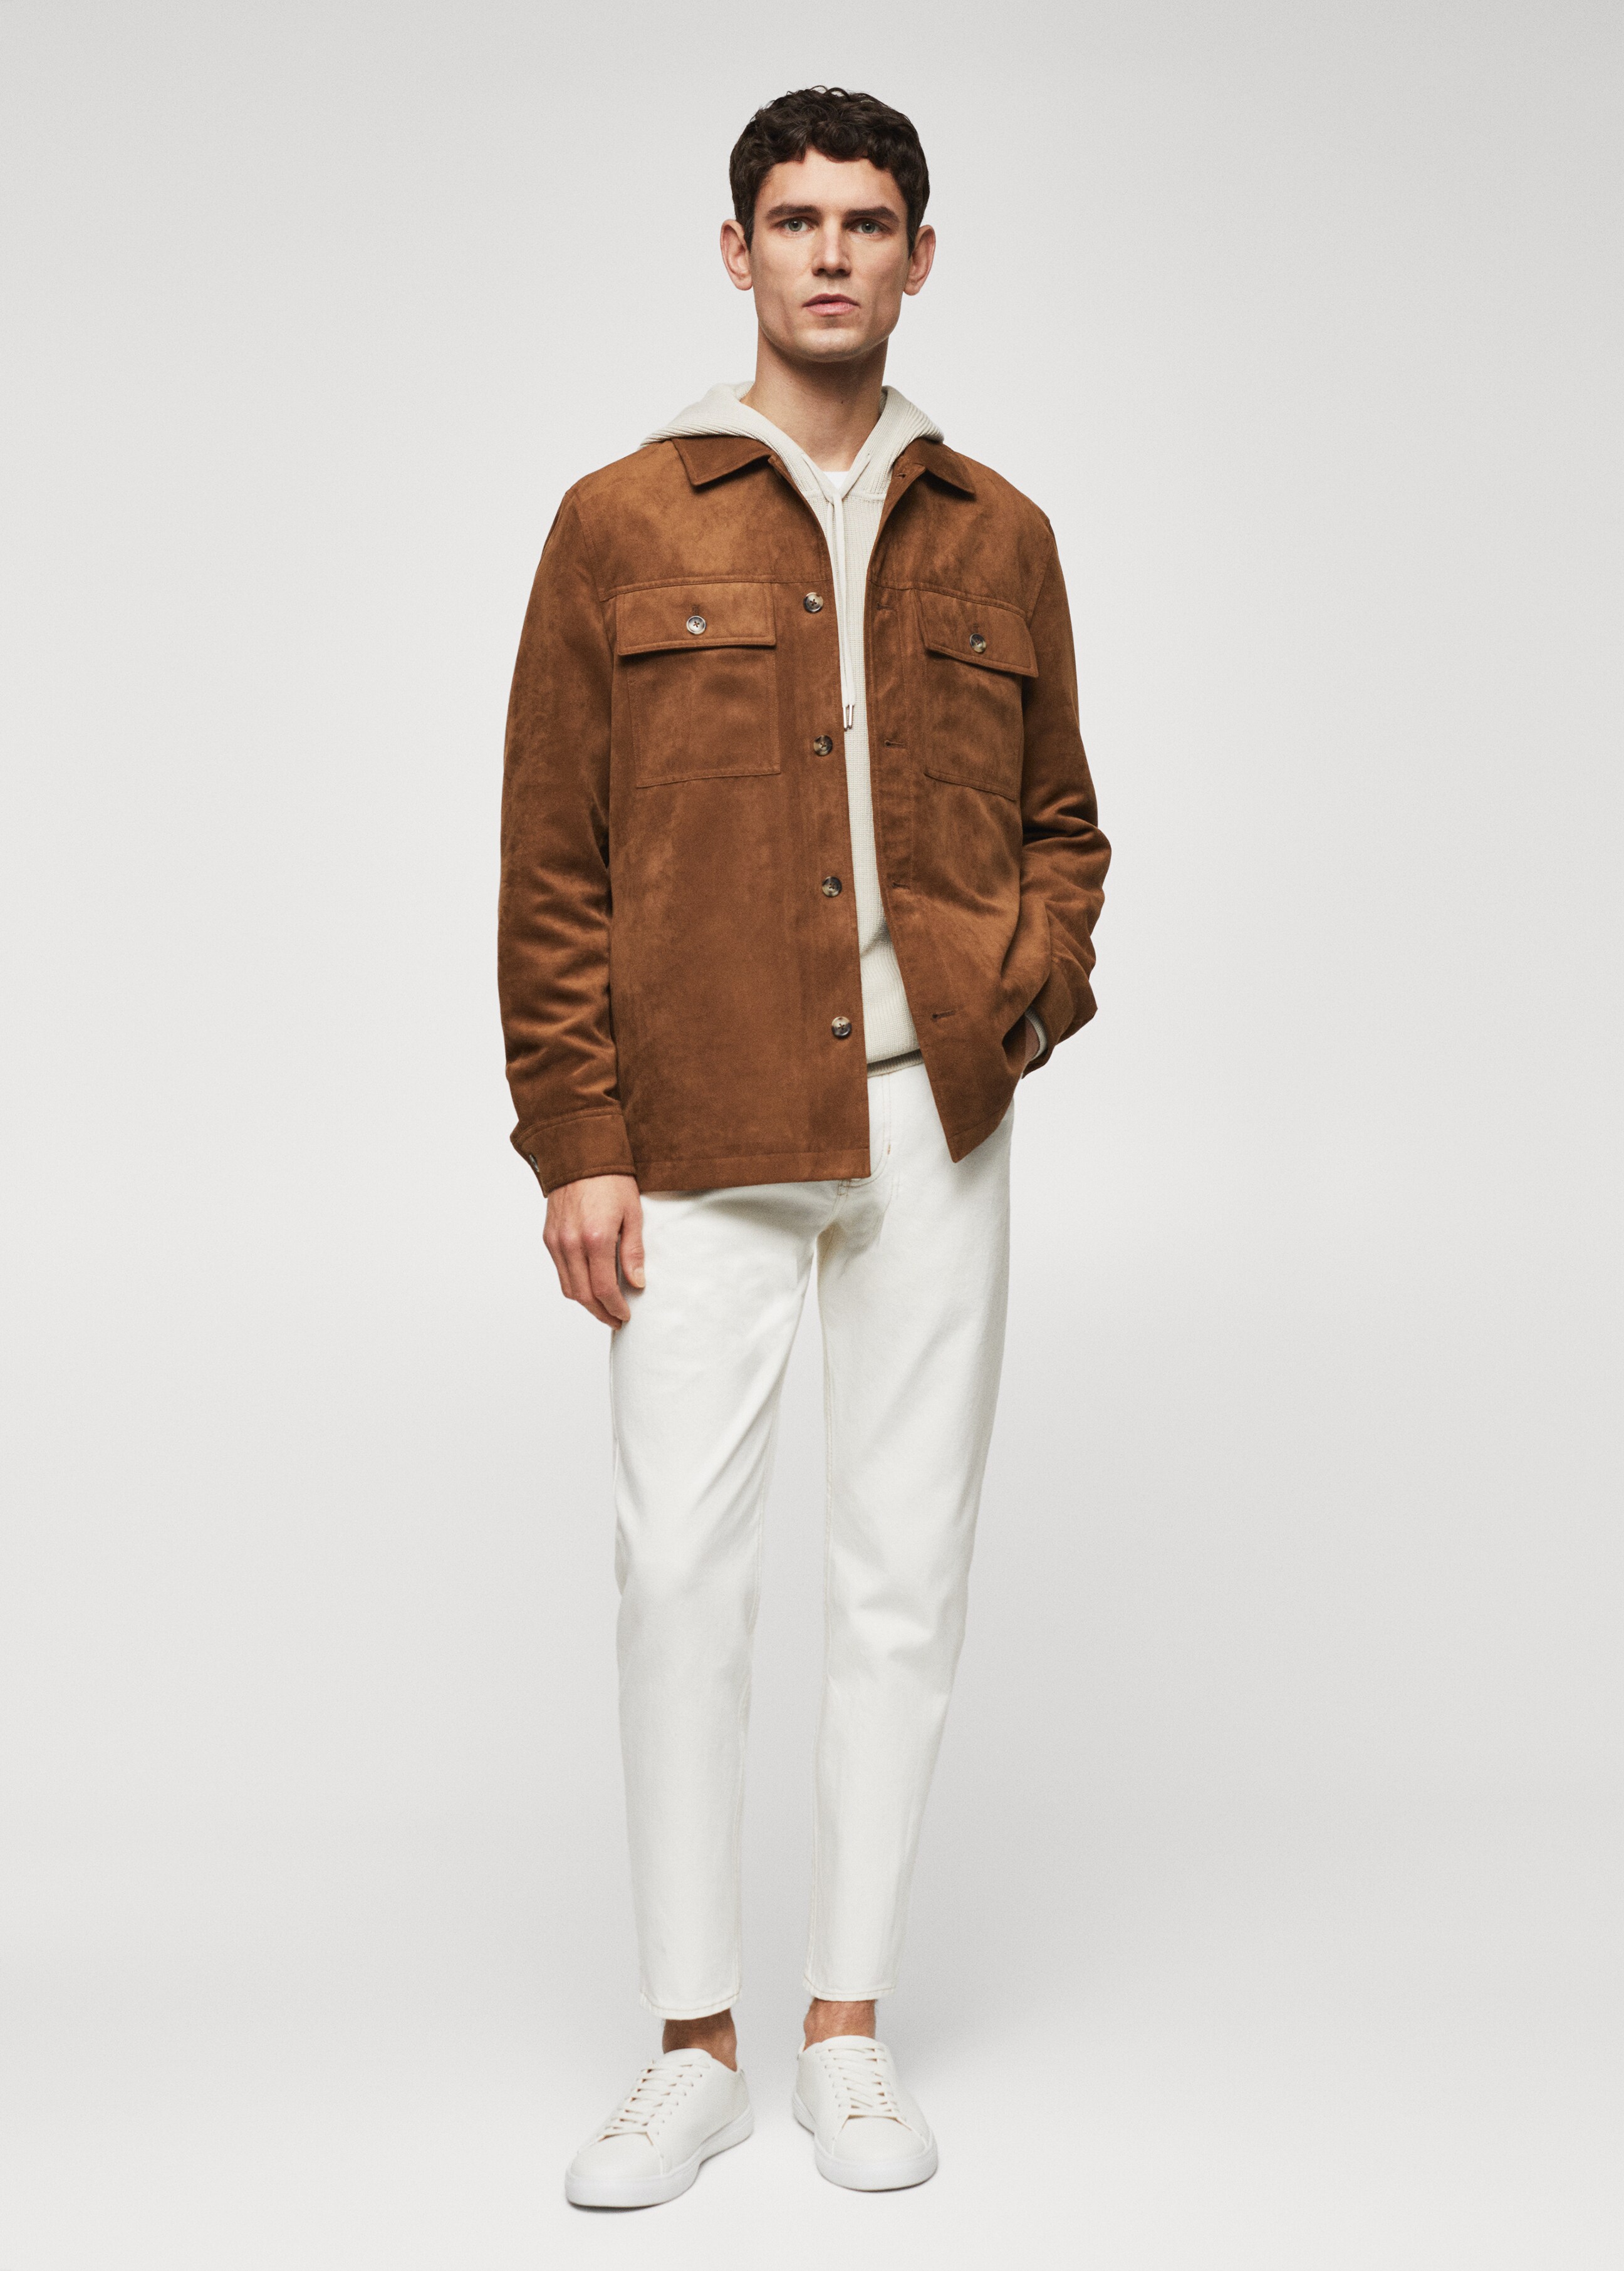 Suede effect overshirt - General plane